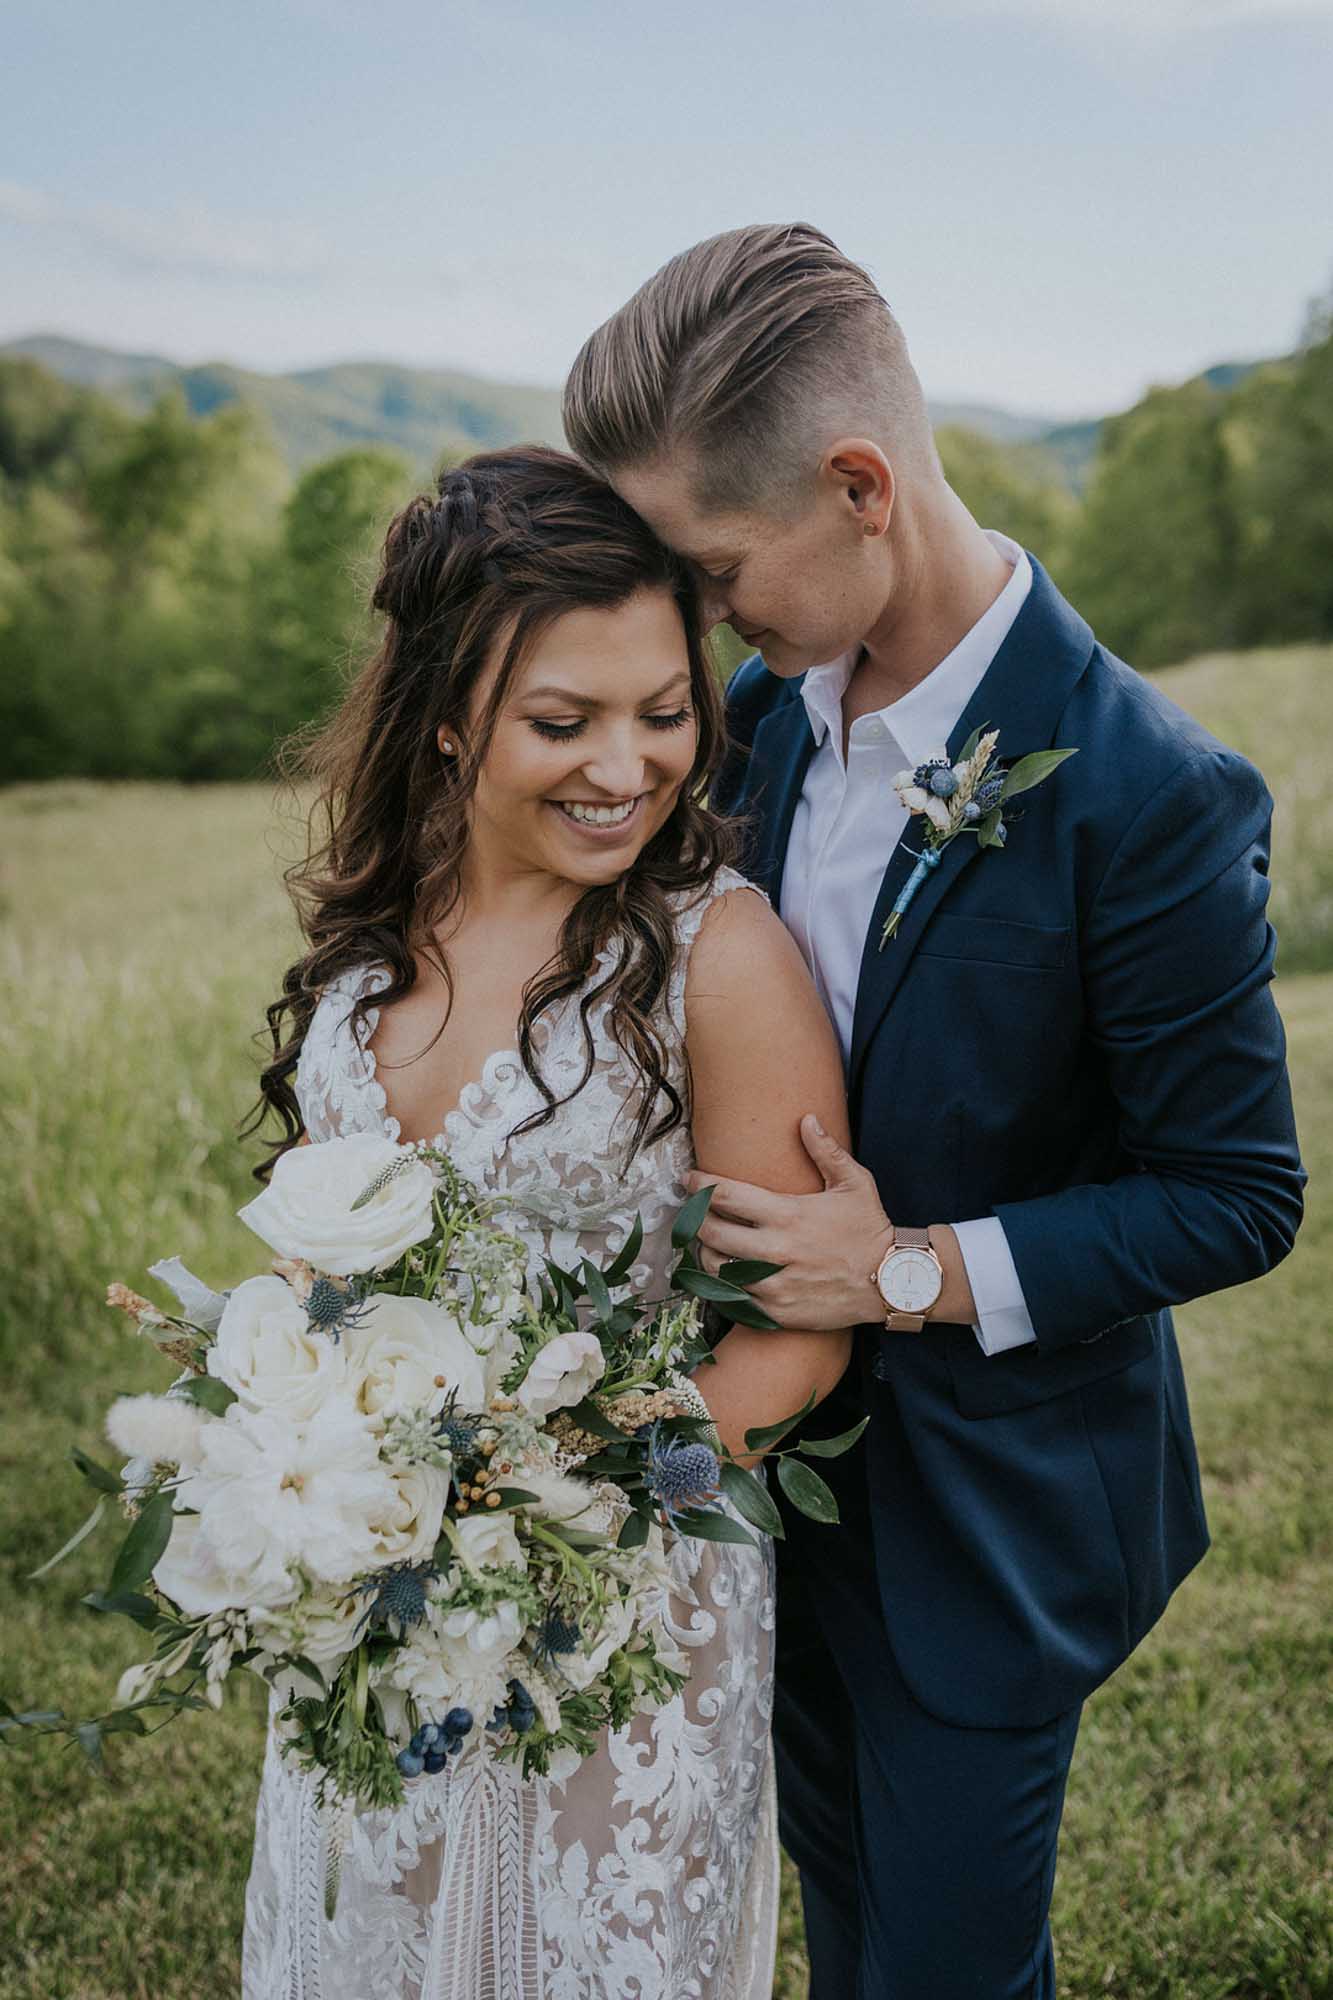 Outdoor wedding with a view in the Smoky Mountains of Tennessee | Katy Sergent Photography | Featured on Equally Wed, the leading LGBTQ+ wedding magazine